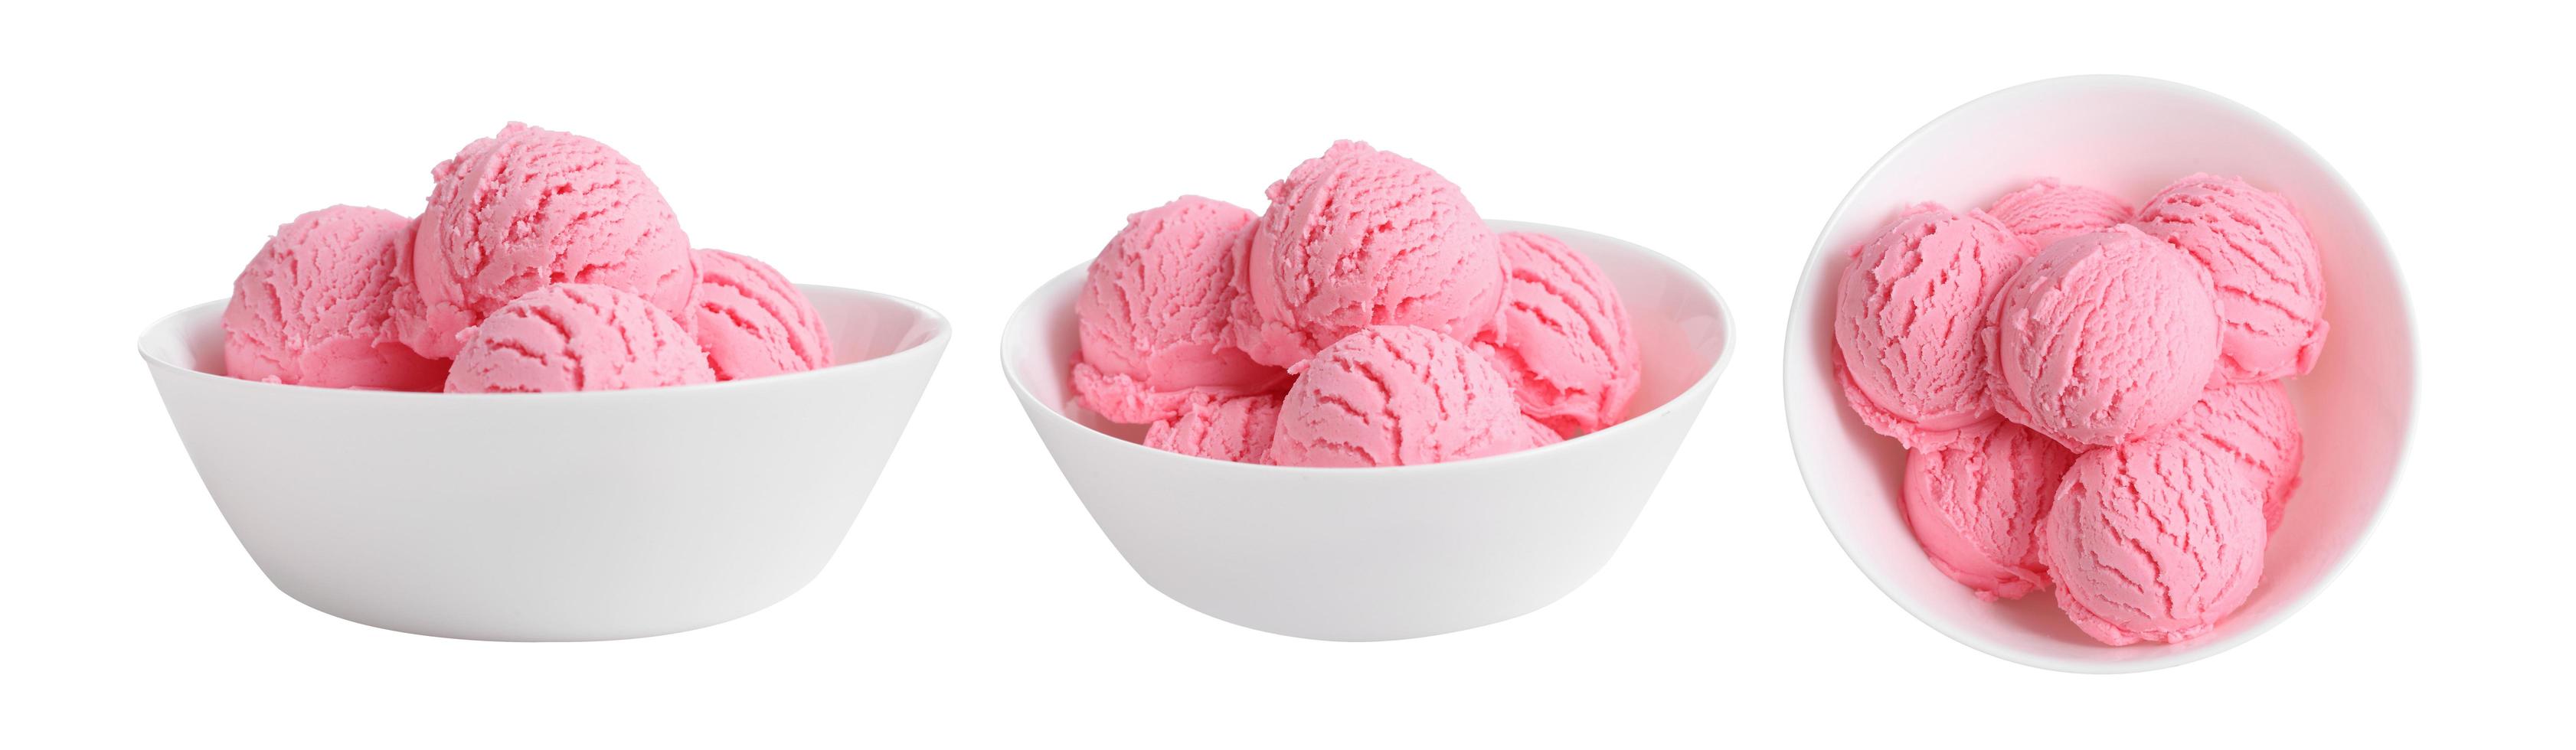 ice cream scoops in white cup on white background photo